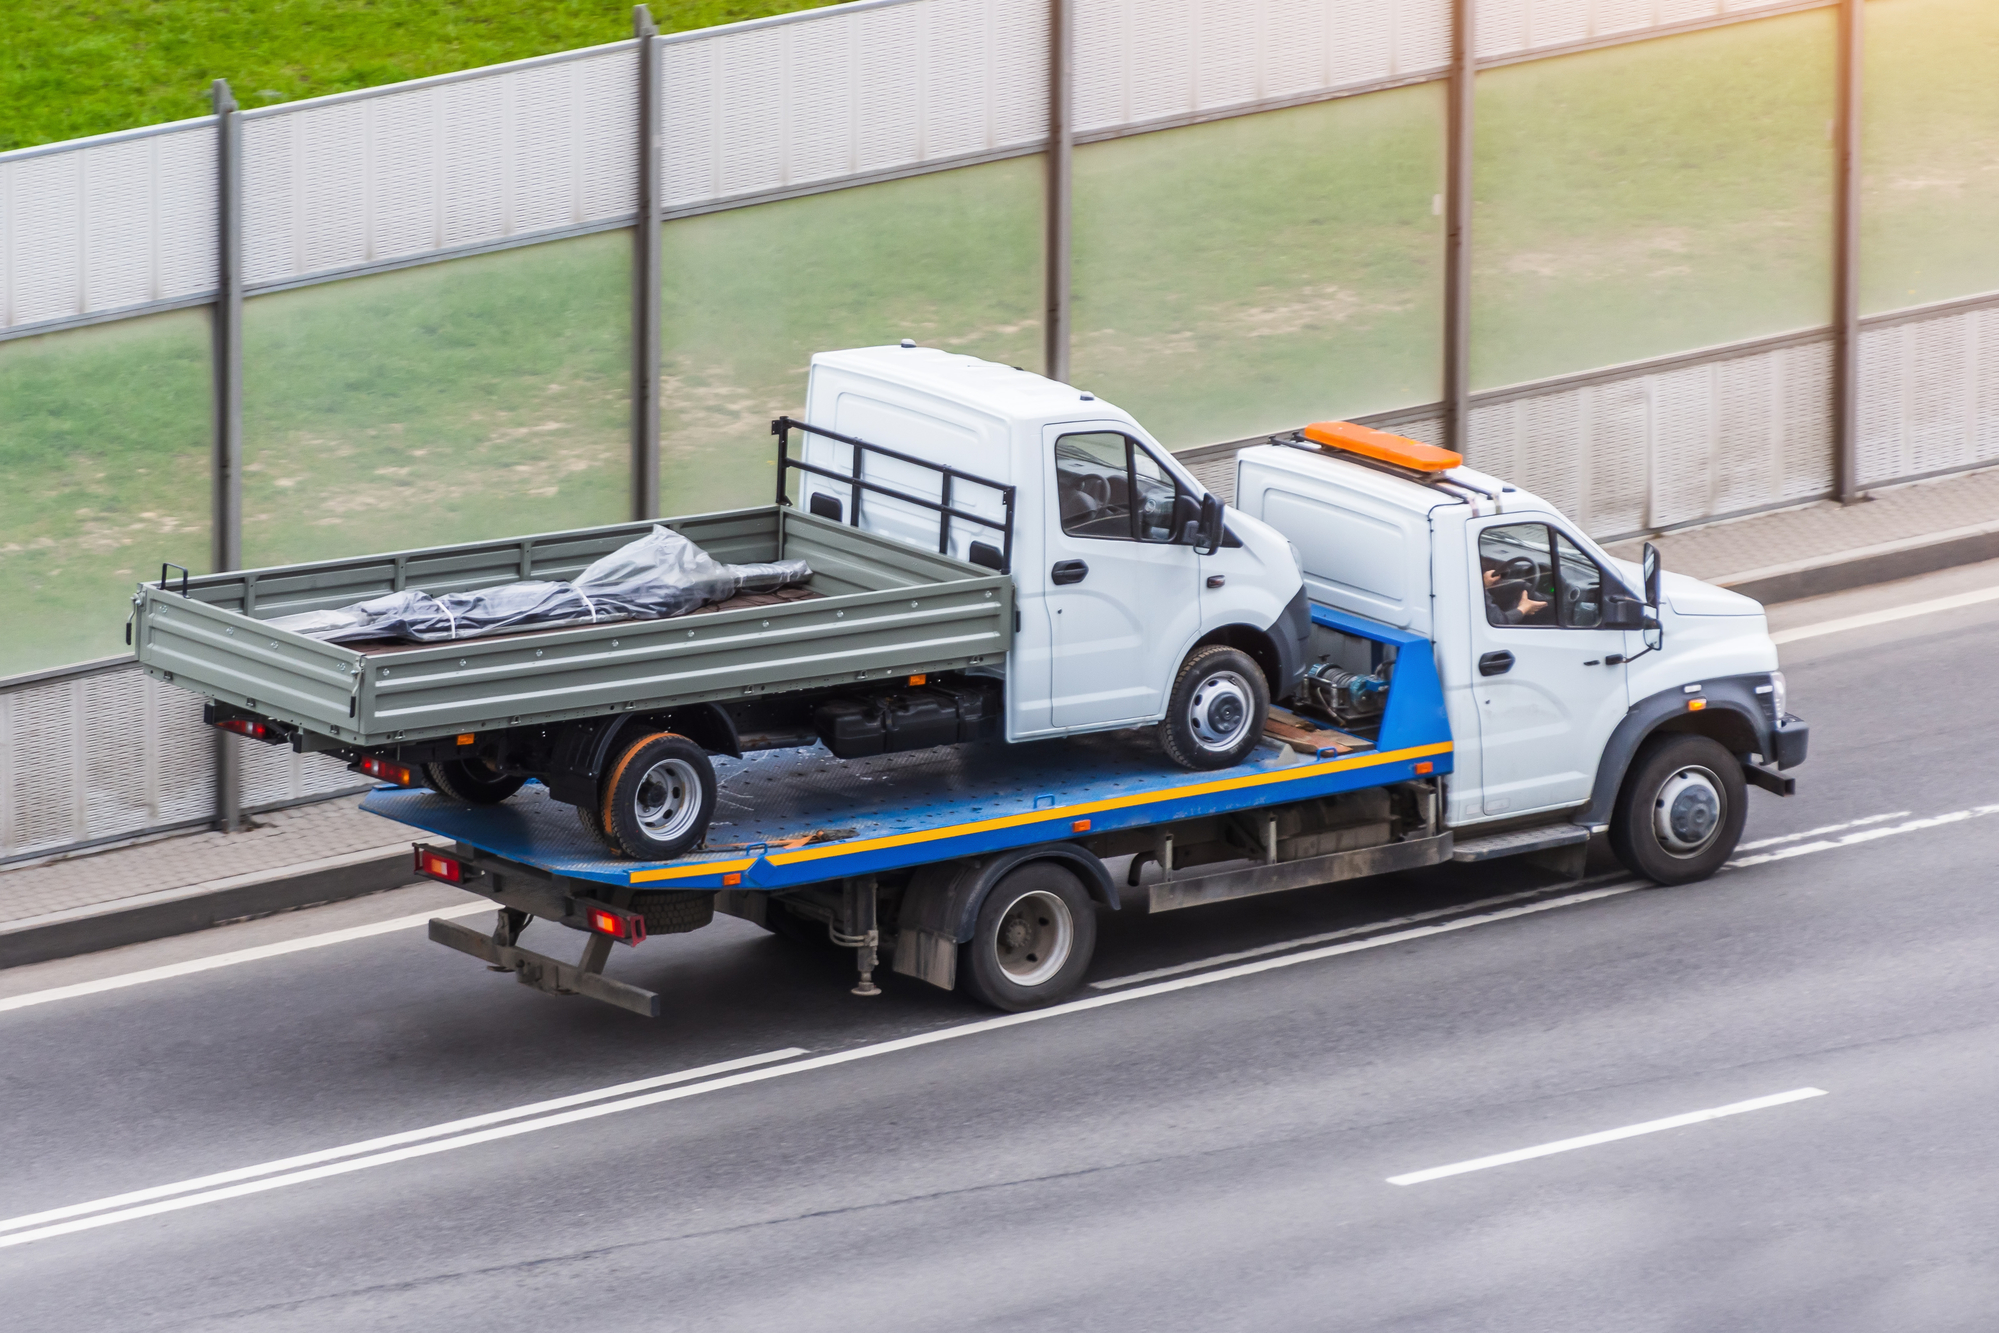 Tow truck transporting another commercial truck on the road